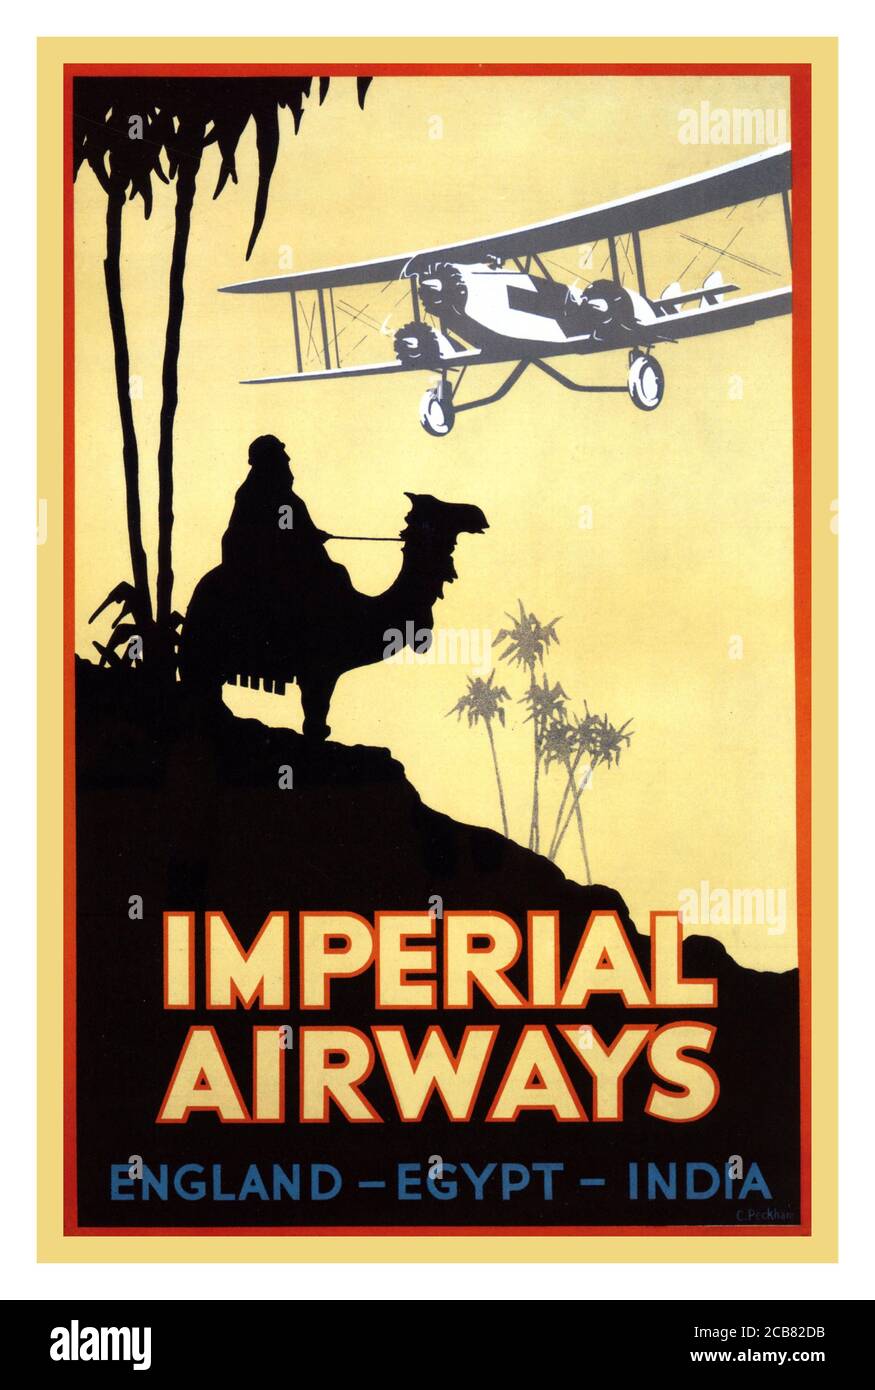 Vintage 1920's Travel Poster for Imperial Airways England- Egypt-India Imperial Airways Poster produced by C. Peckham 1927 poster illustrates an Egyptian man sitting on a tourist camel with a fringed saddle, watching airplane (Imperial Airways, De Havilland D.H. 66, 'Hercules') flying overhead. Imperial Airways was a British pioneer of commercial long-range air travel. The airline operated from 1924 to 1939, serving regions of Europe. Stock Photo